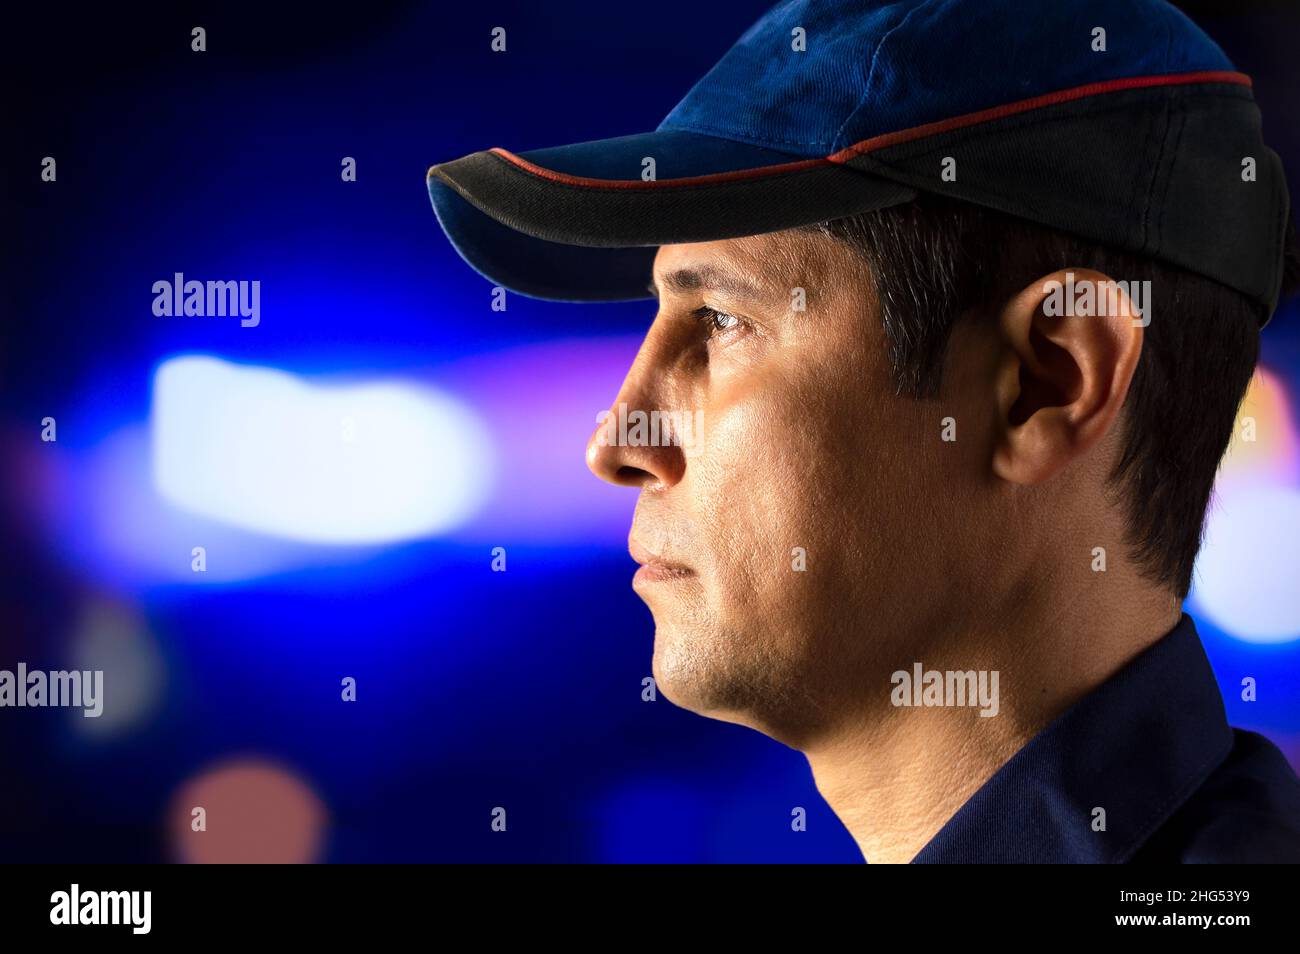 Cropped portrait of a policeman standing alone and staring into a control at night Stock Photo